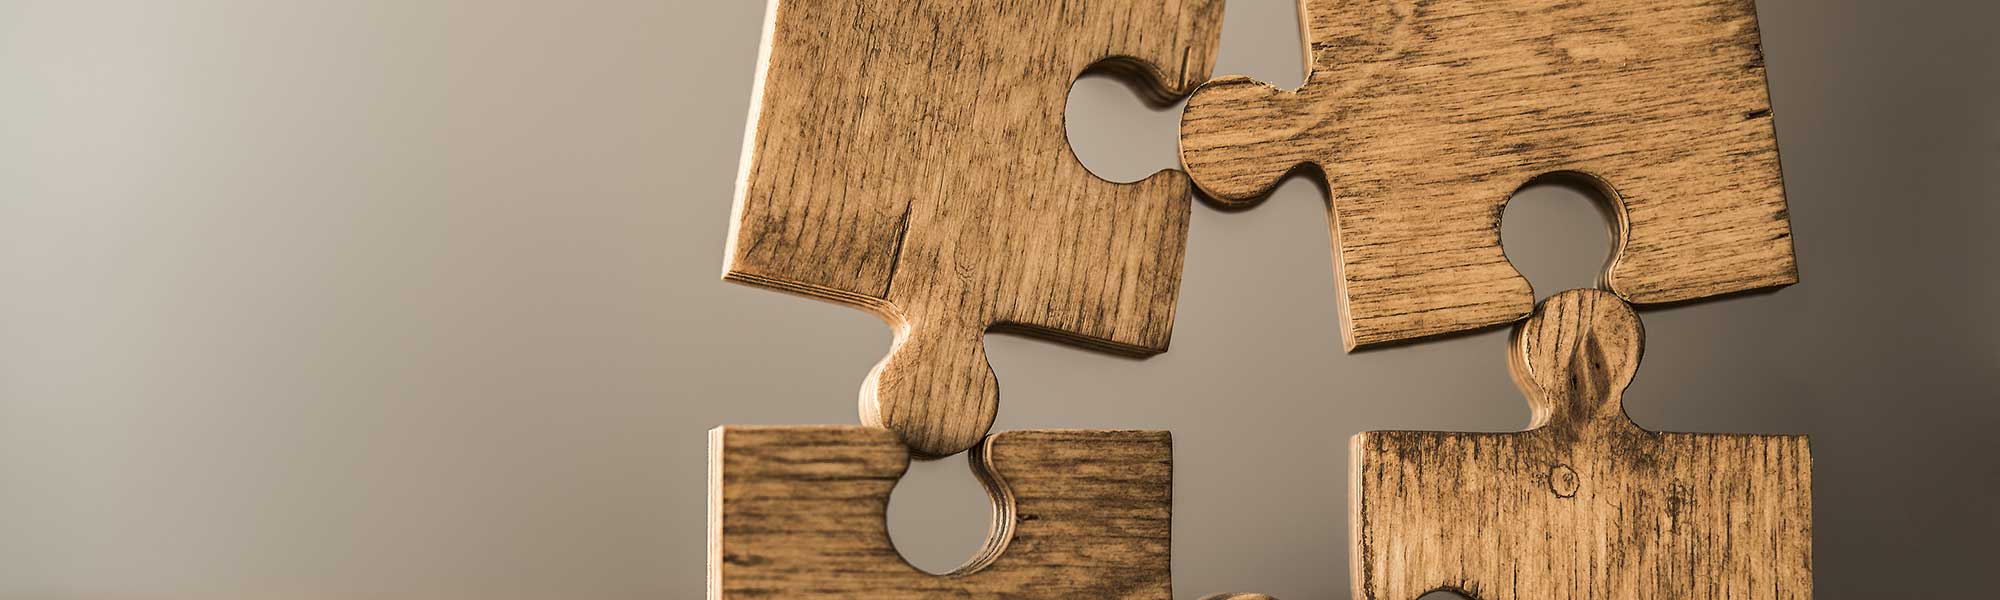 Wooden pieces of a jigsaw puzzle